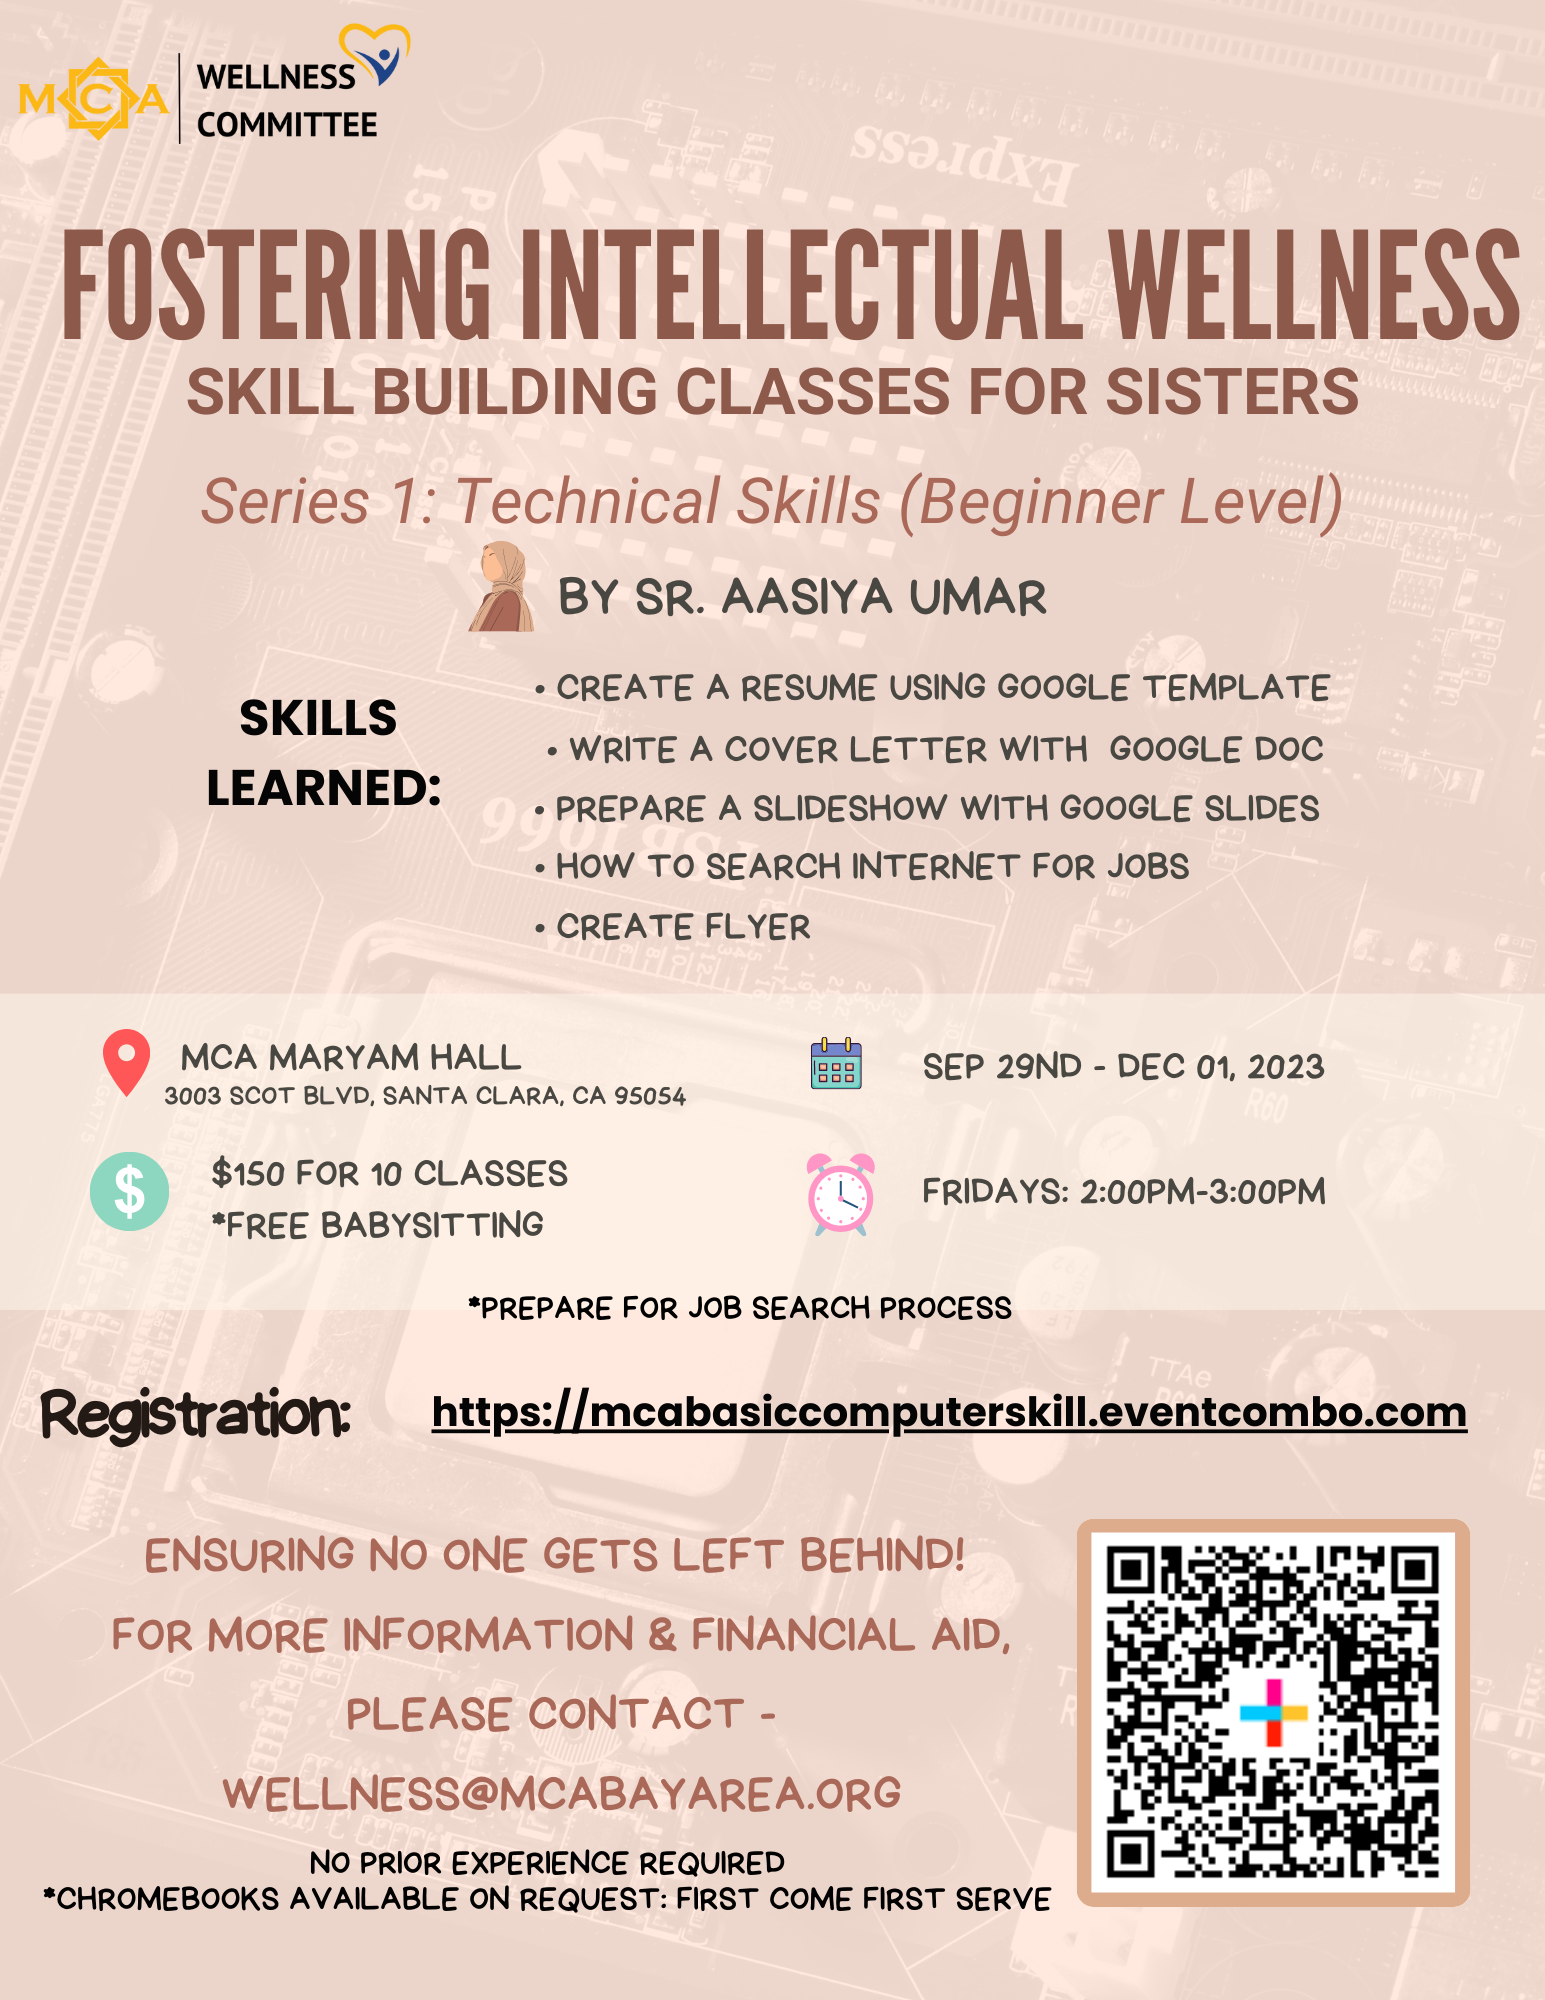 FOSTERING INTELLECTUAL WELLNESS 
SKILL BUILDING CLASSES FOR SISTERS: Series 1 : Technical Skills (Beginner Level)